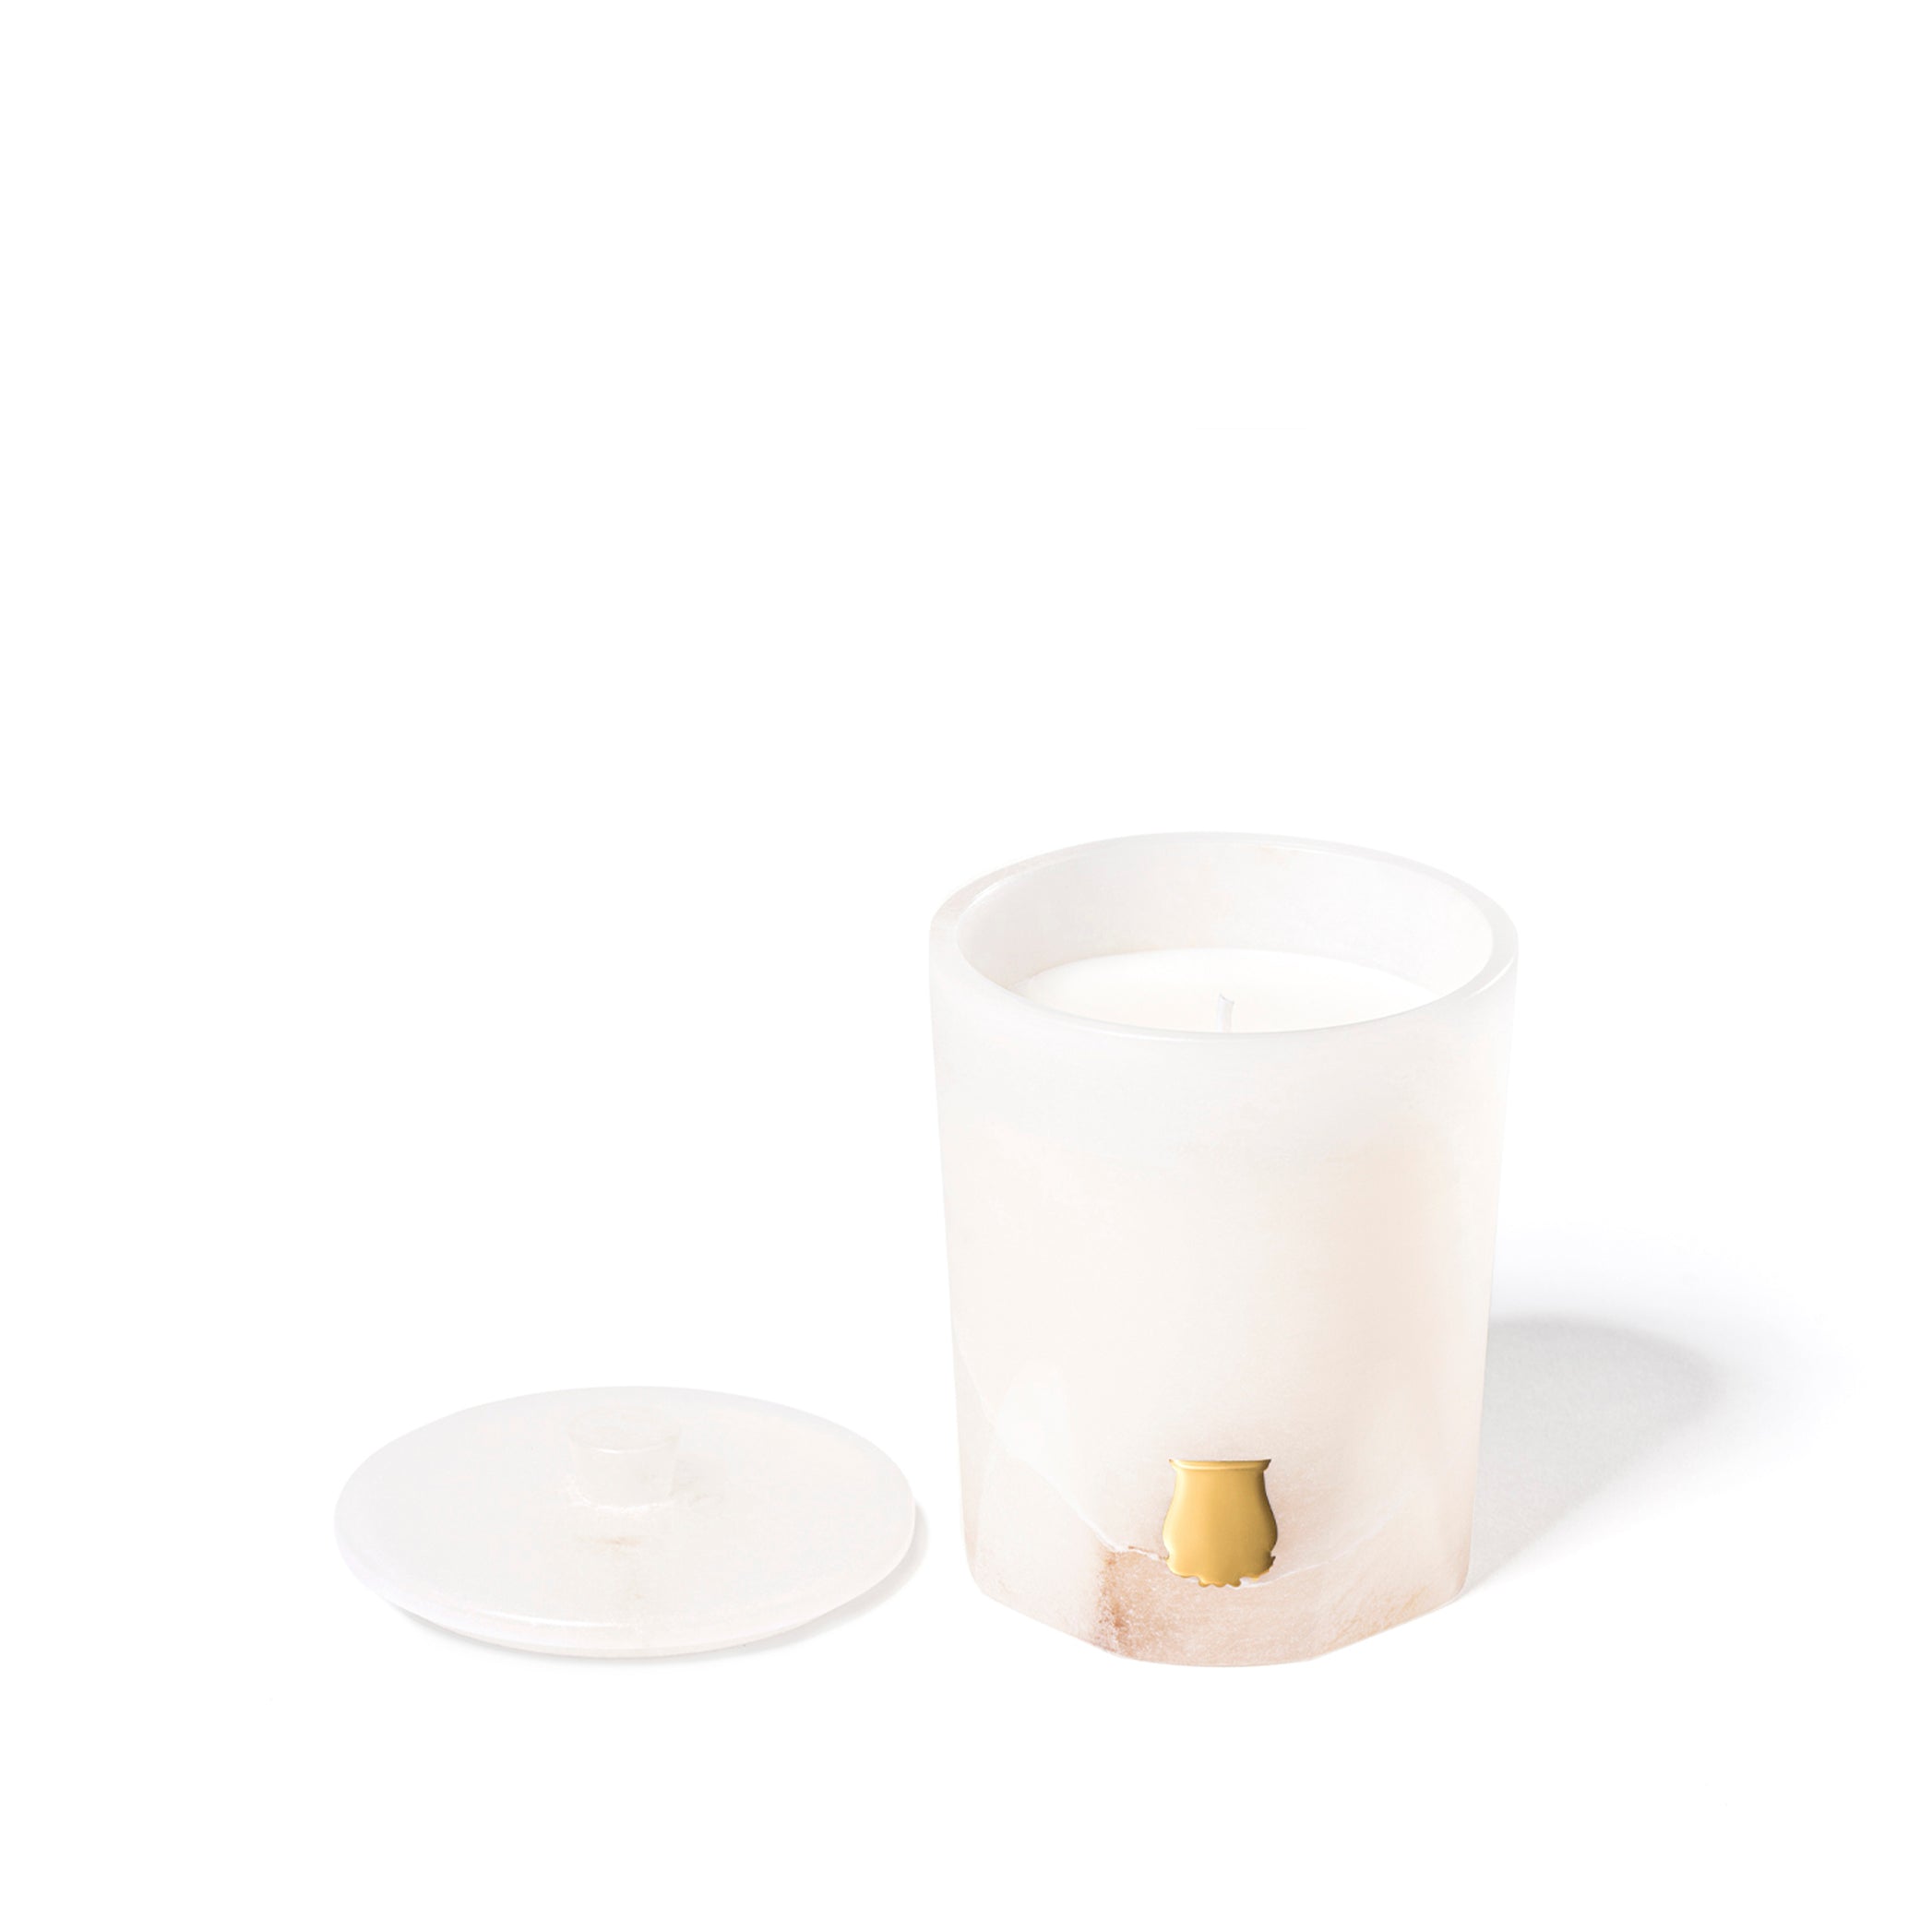 Alabaster Atria Candle by Trudon, 270g